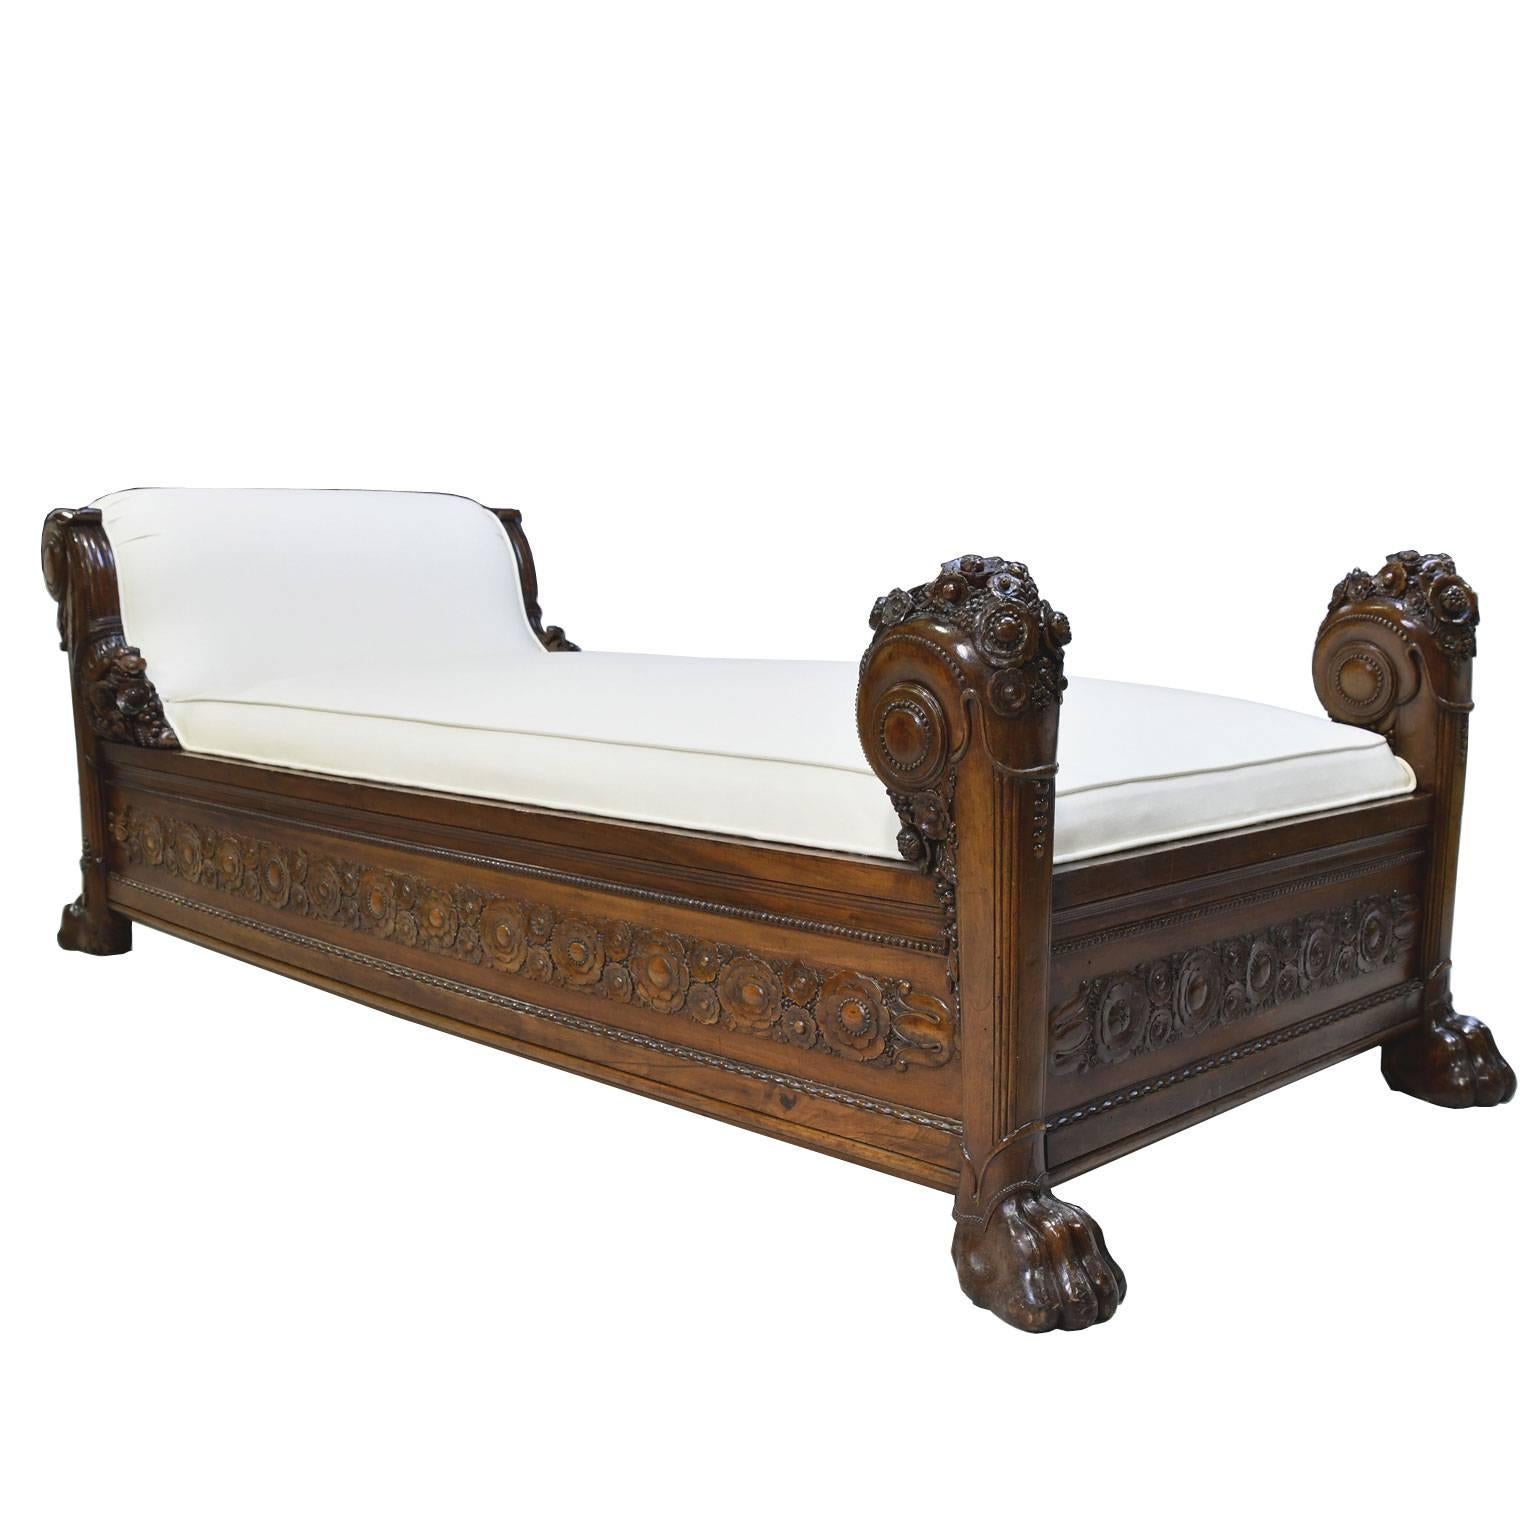 Late 18th Century French Directoire Daybed in Carved Mahogany with Upholstery 7